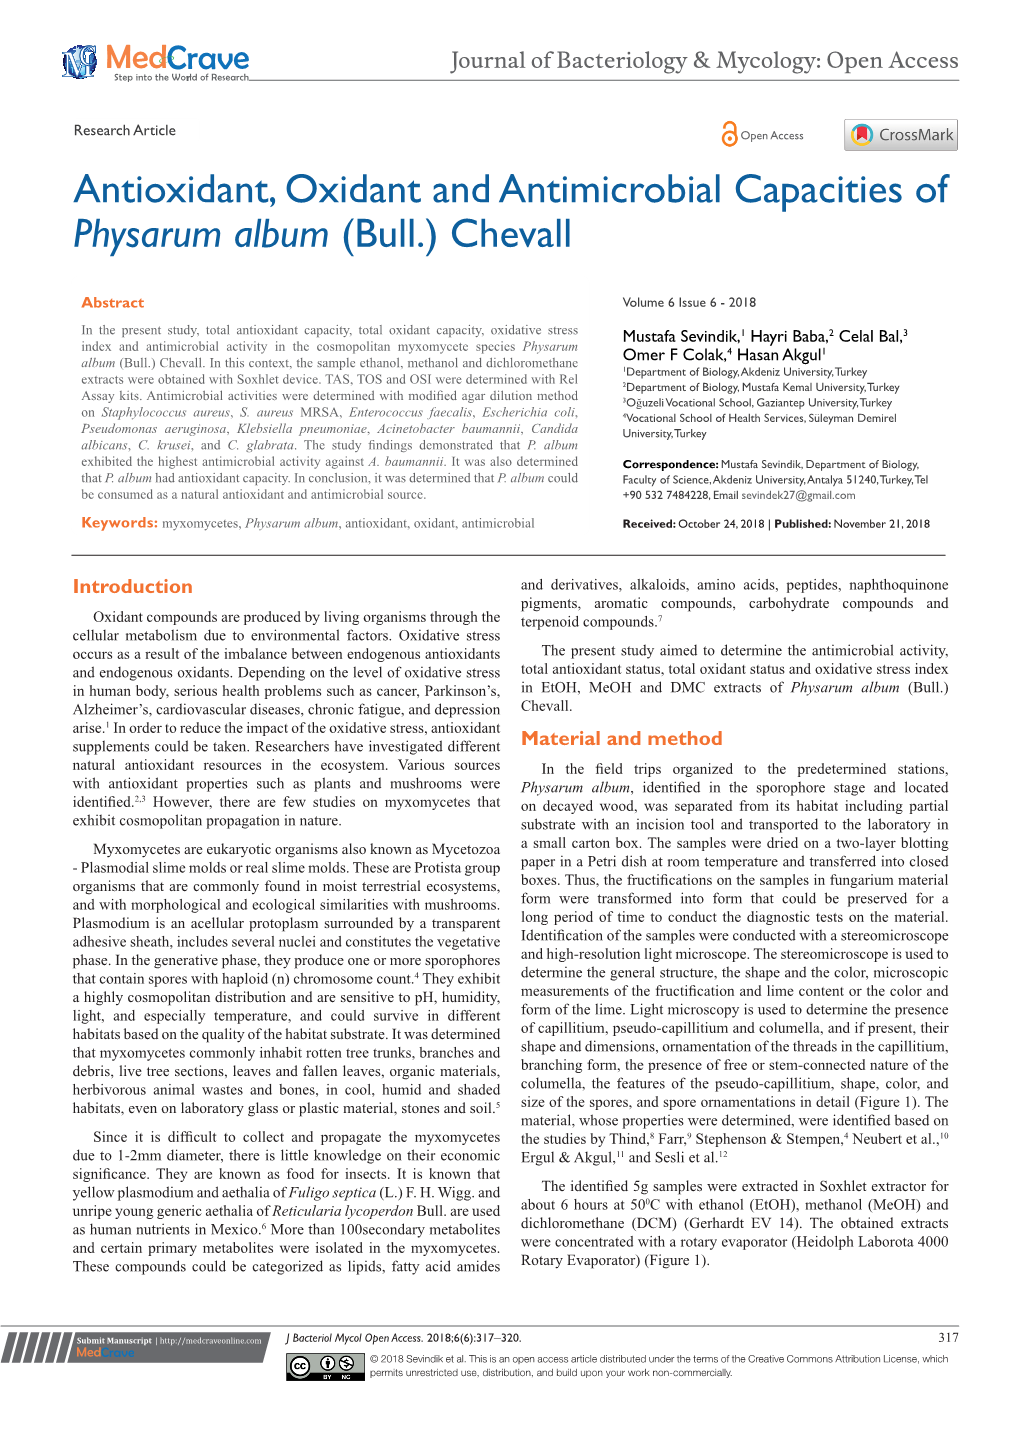 Antioxidant, Oxidant and Antimicrobial Capacities of Physarum Album (Bull.) Chevall